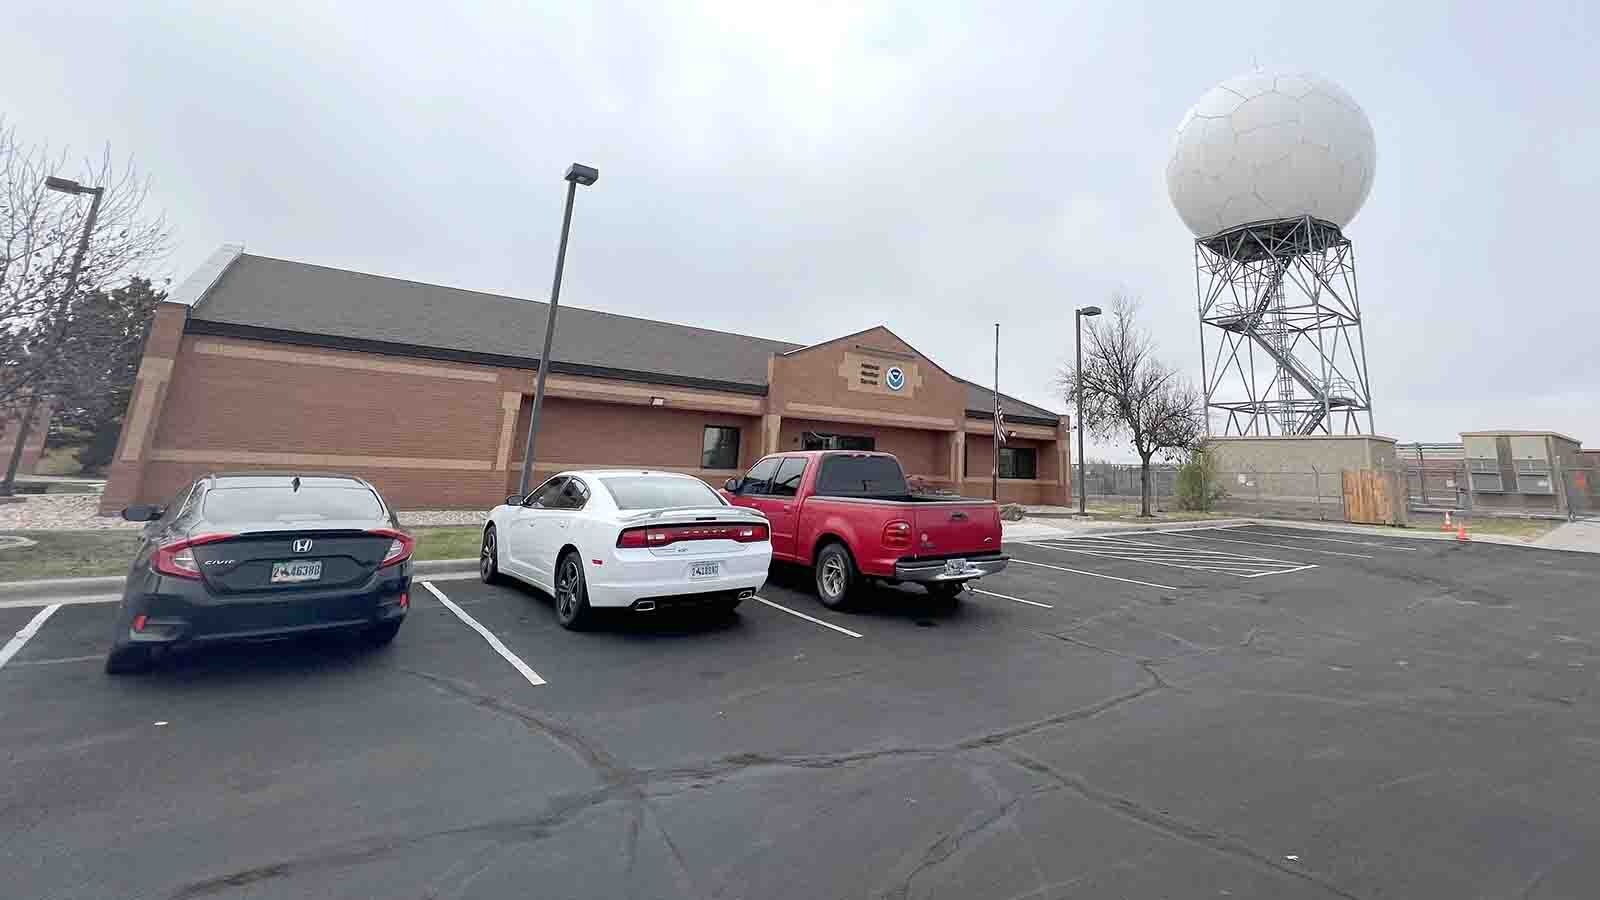 The Doppler radar at the Cheyenne National Weather Service office looks like a giant golf ball on a pedestal.